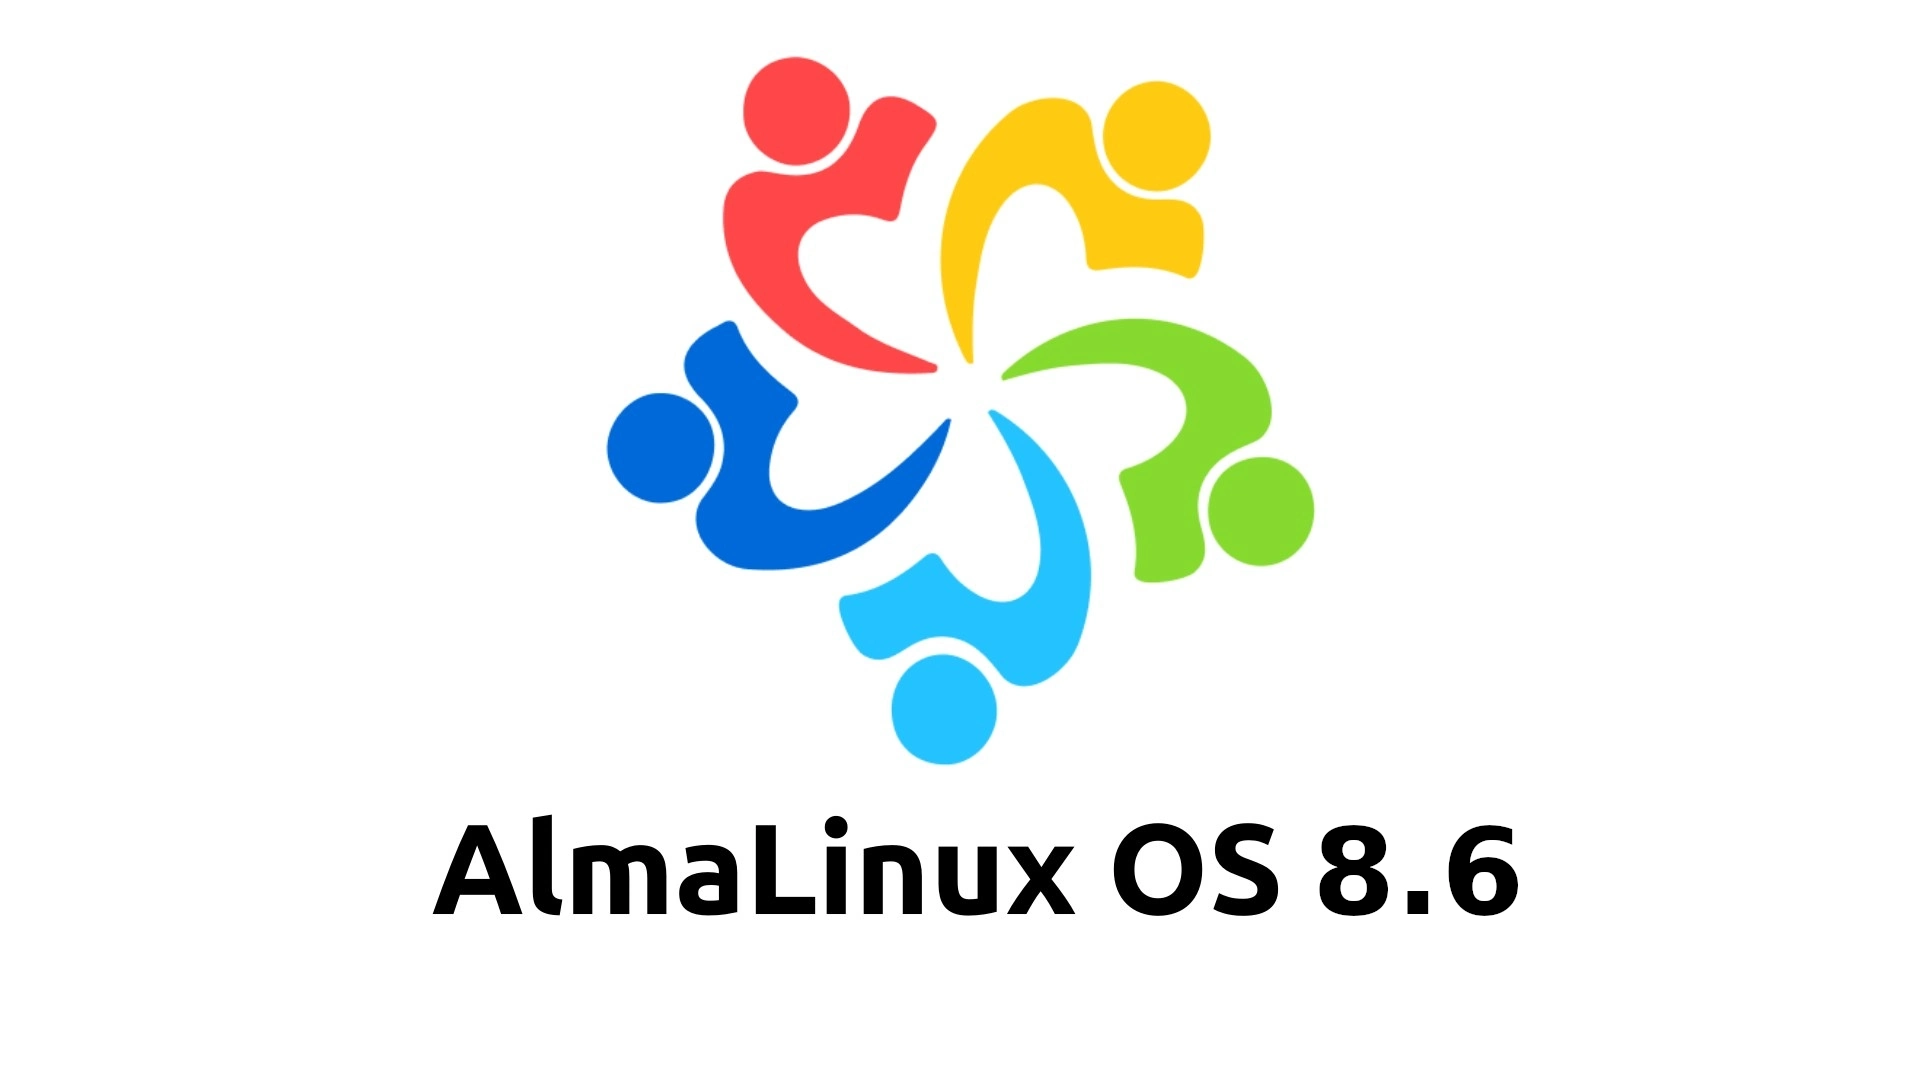 CentOS Alternative AlmaLinux OS 8.6 Is Now Available for Download, Based on RHEL 8.6